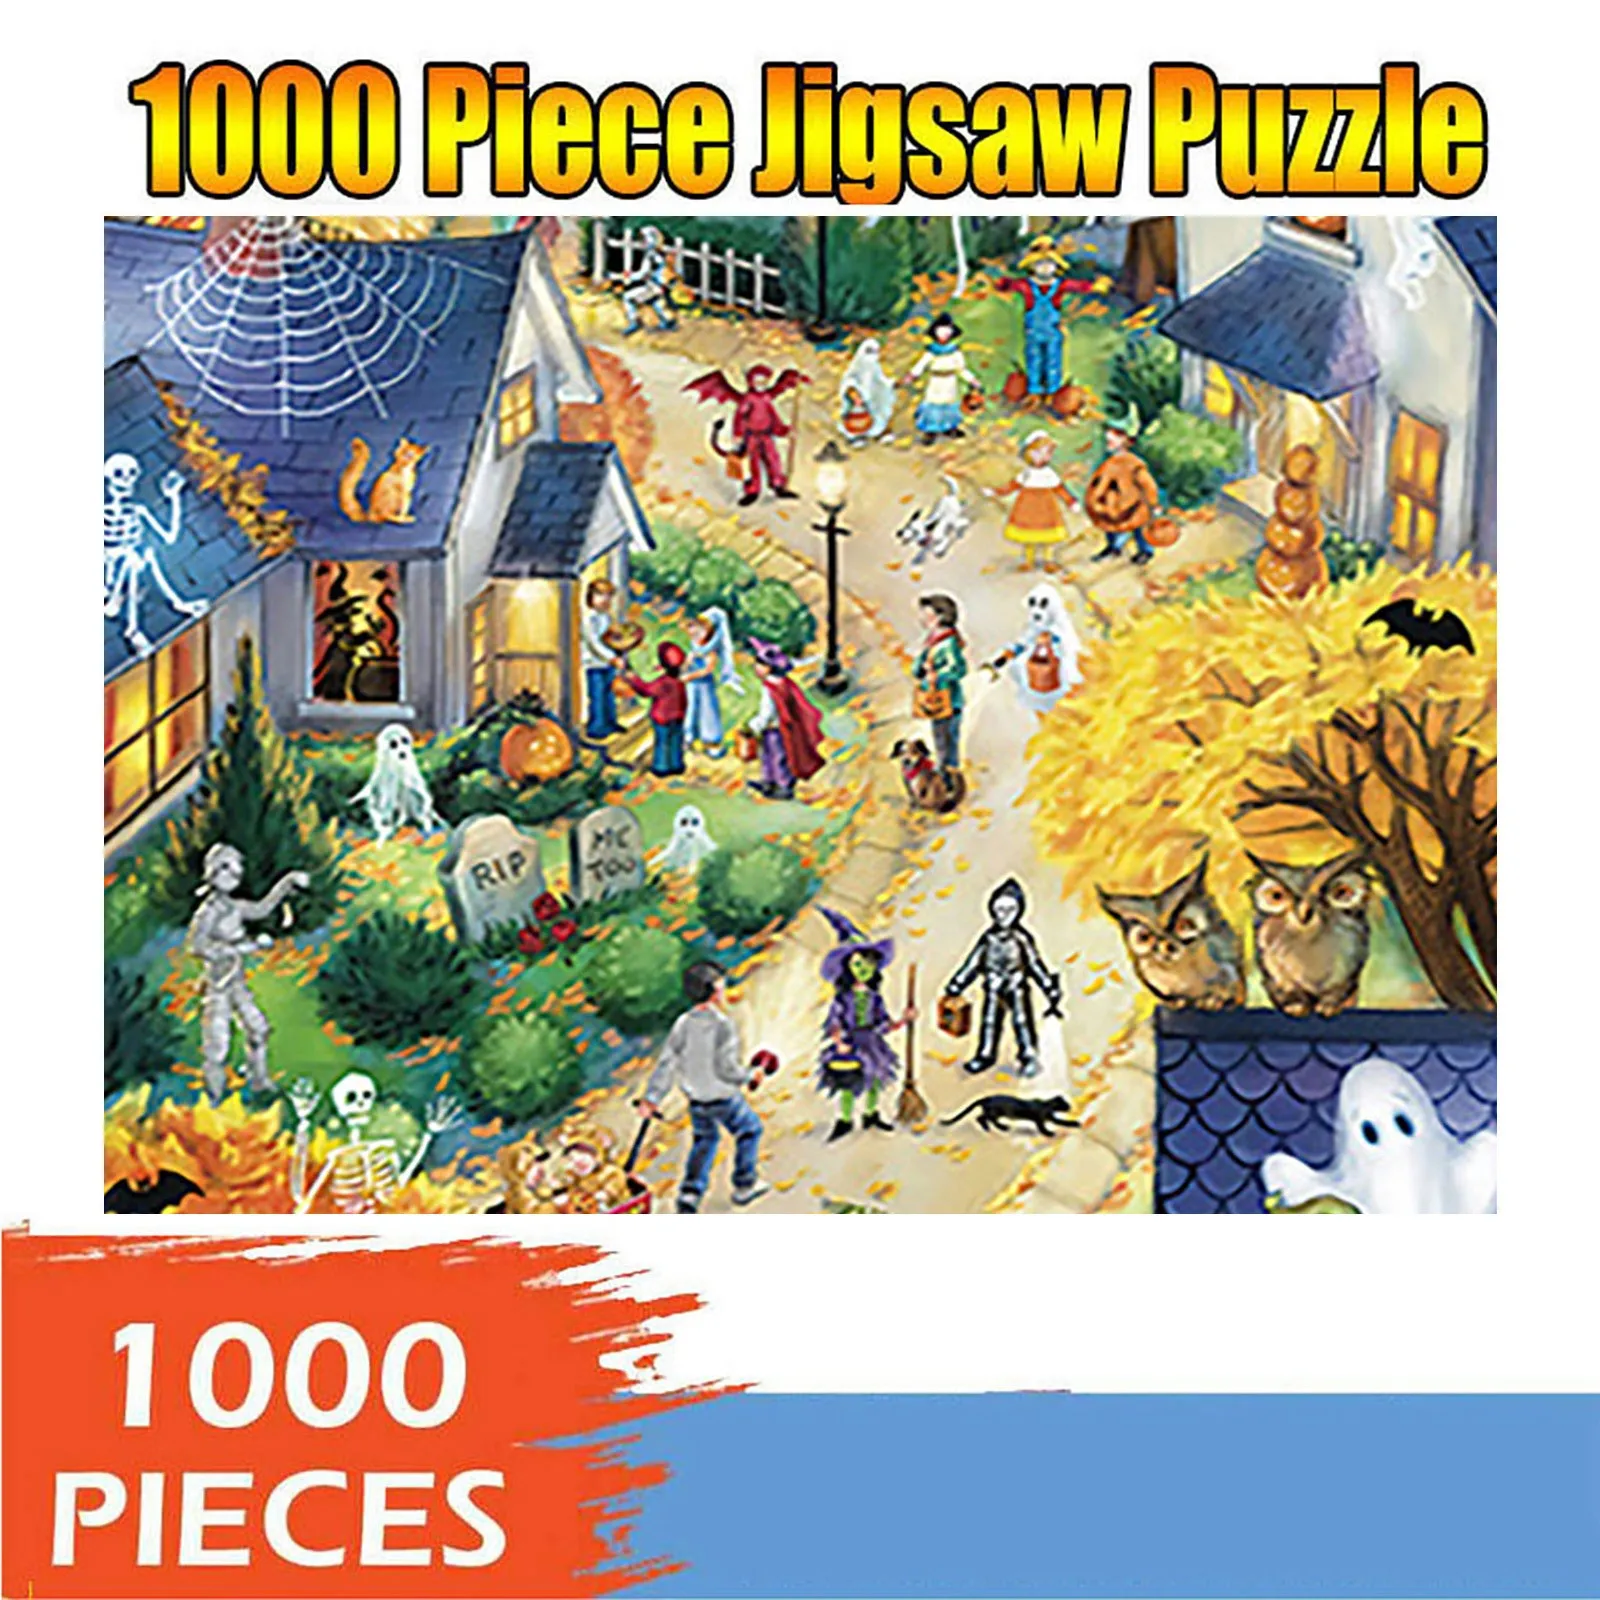 Leisure Time DIY Toys Puzzles for Home Decoration Festival Gift Castle Skull Pumpkin Puzzle Intellective Learning Decompression Game LINGDANG Halloween Puzzles for Adult Children 1000 Piece A